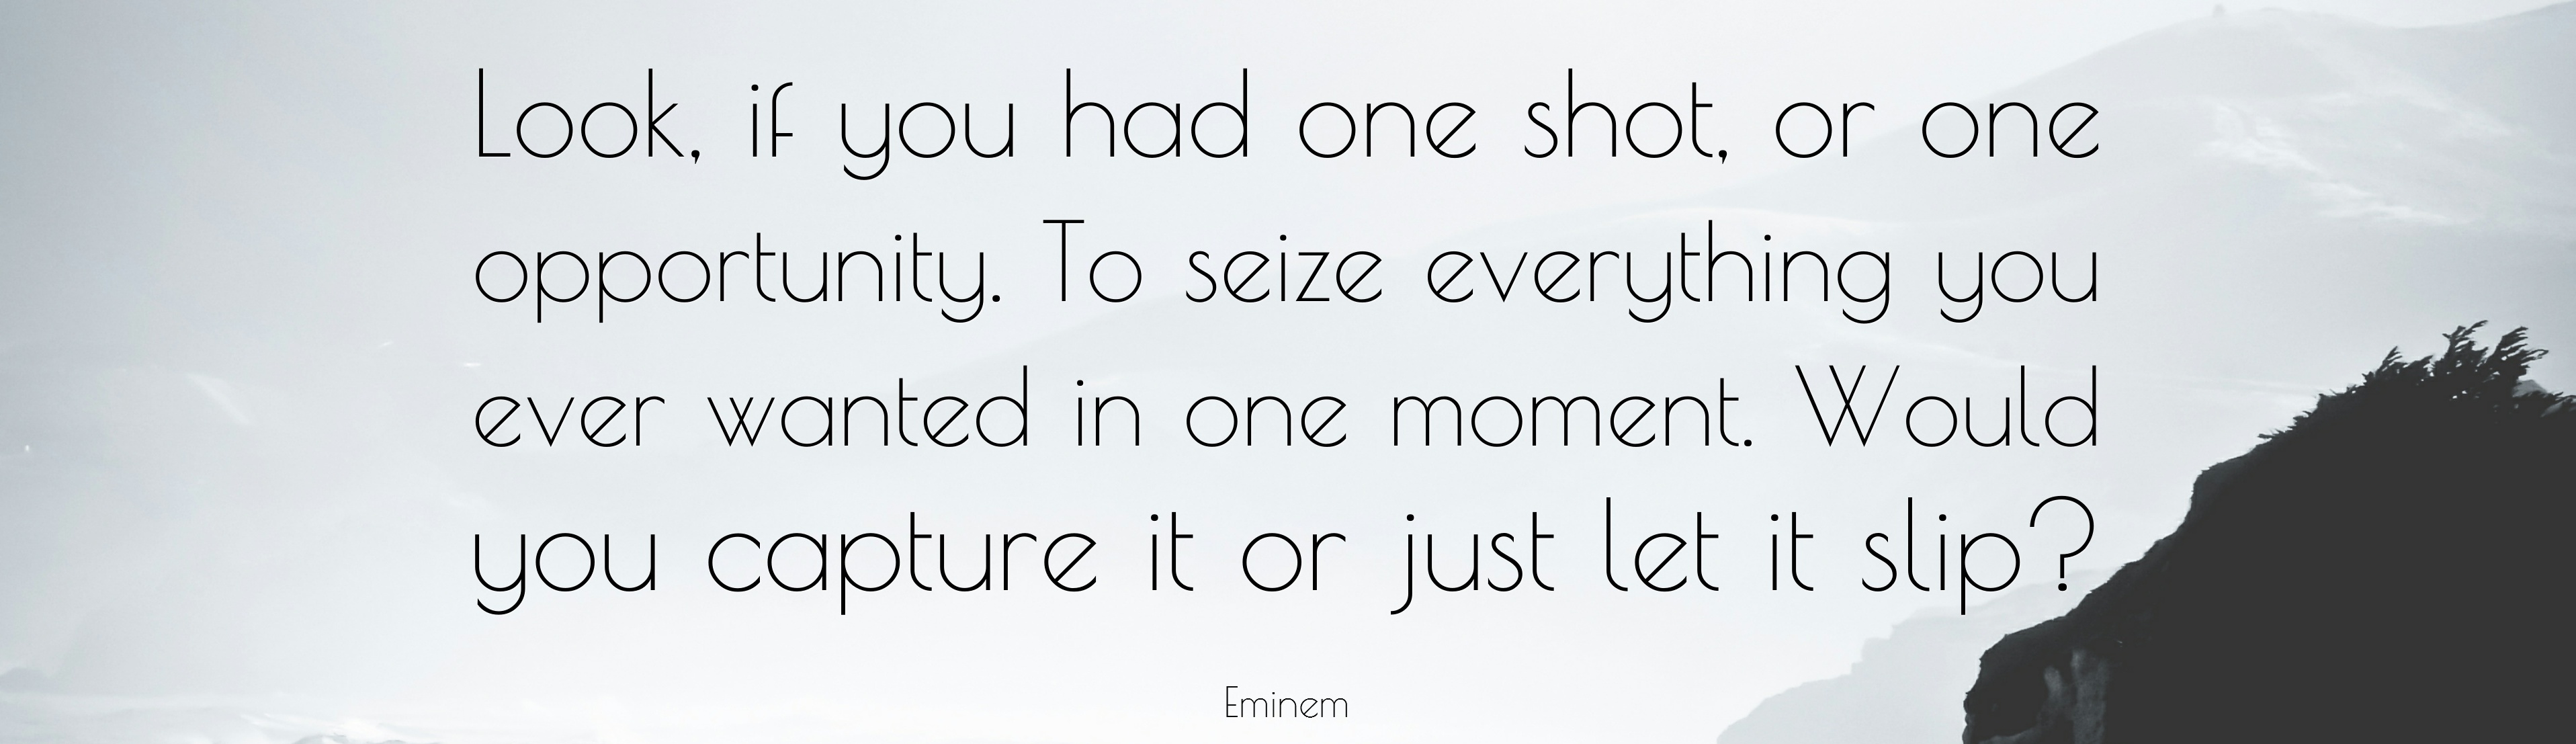 6341-Eminem-Quote-Look-if-you-had-one-shot-or-one-opportunity-To-seize-01